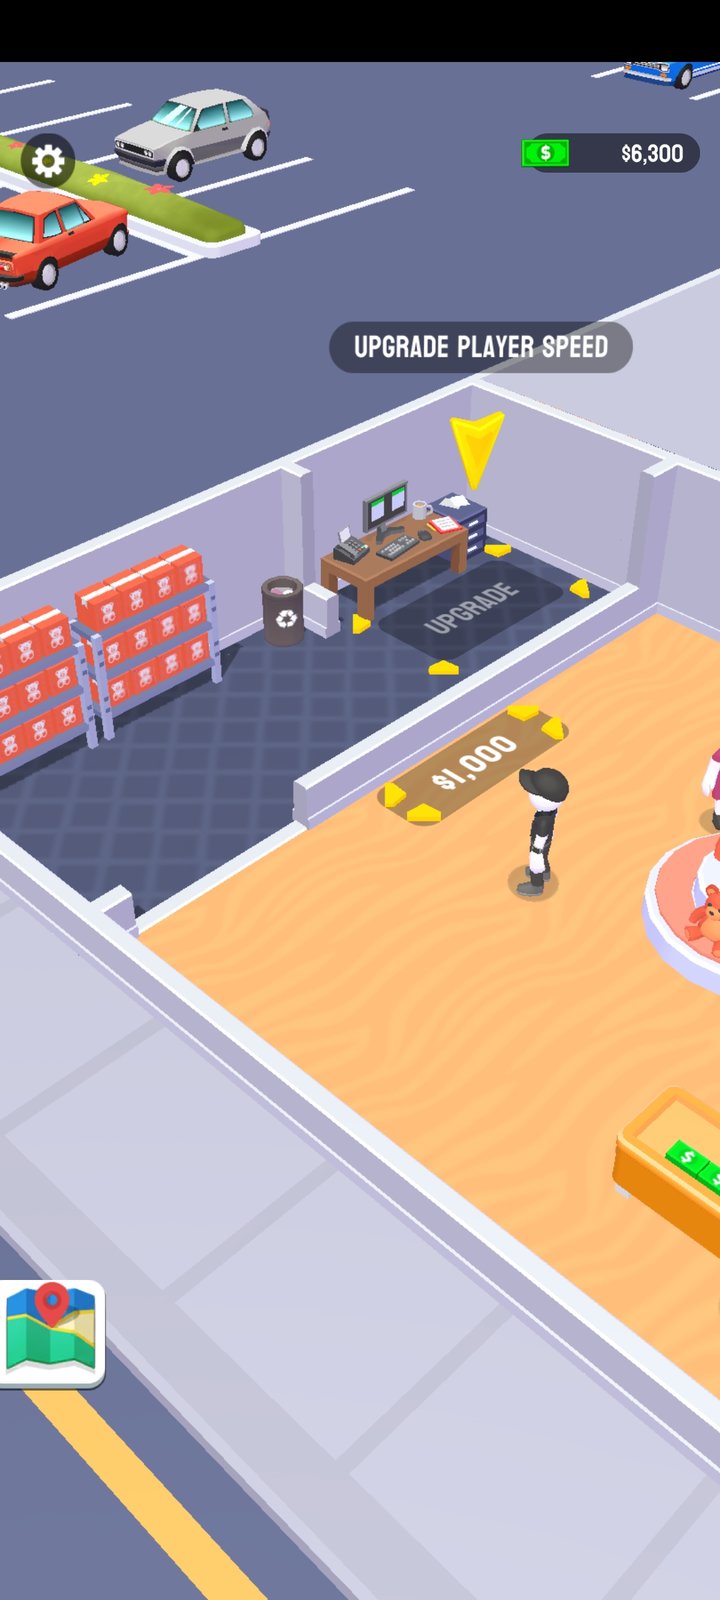 Idle Mall Tycoon Games: Mart v0.12.0 MOD APK -  - Android &  iOS MODs, Mobile Games & Apps